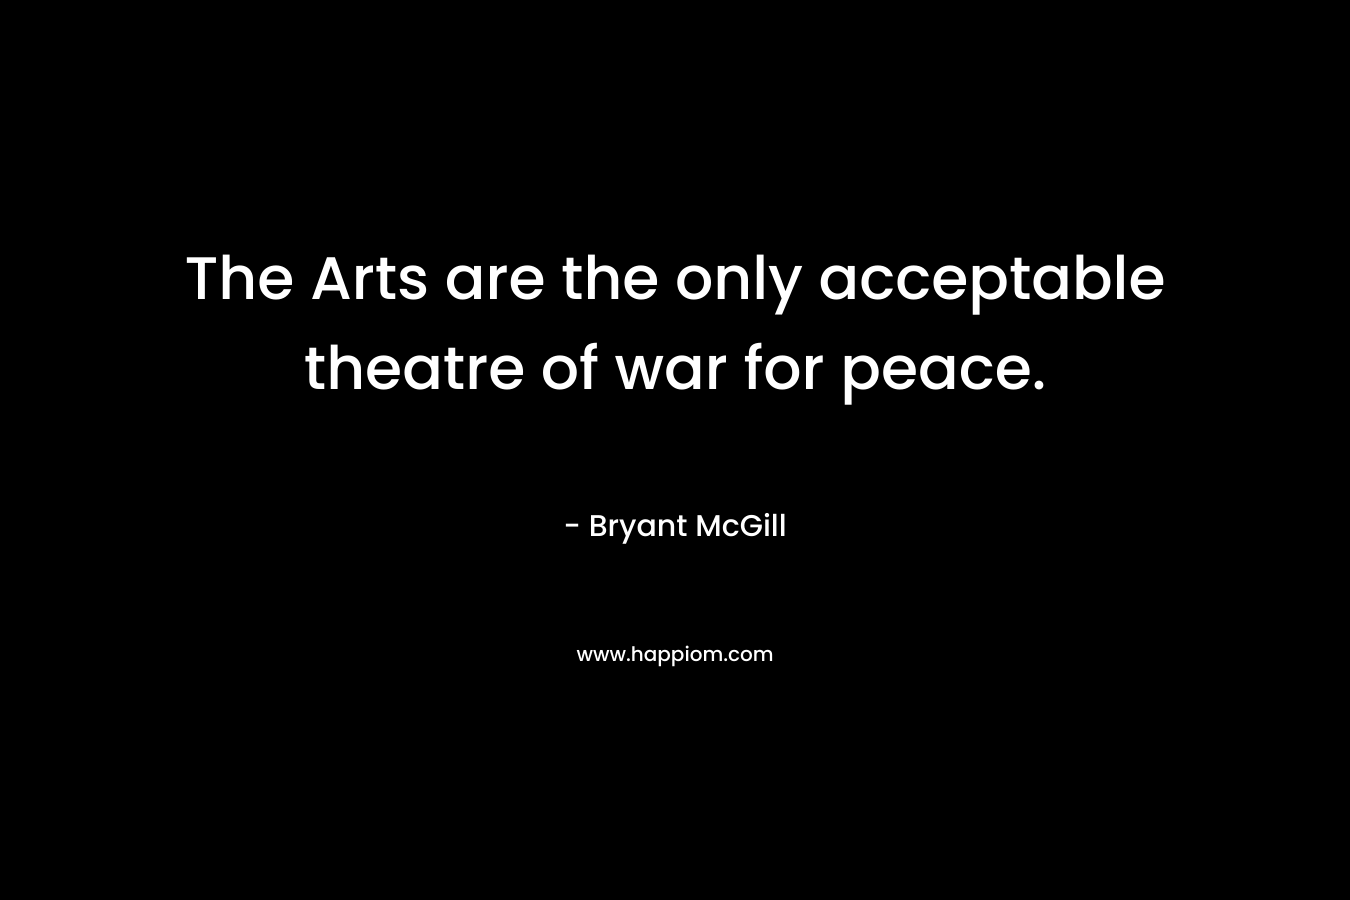 The Arts are the only acceptable theatre of war for peace. – Bryant McGill